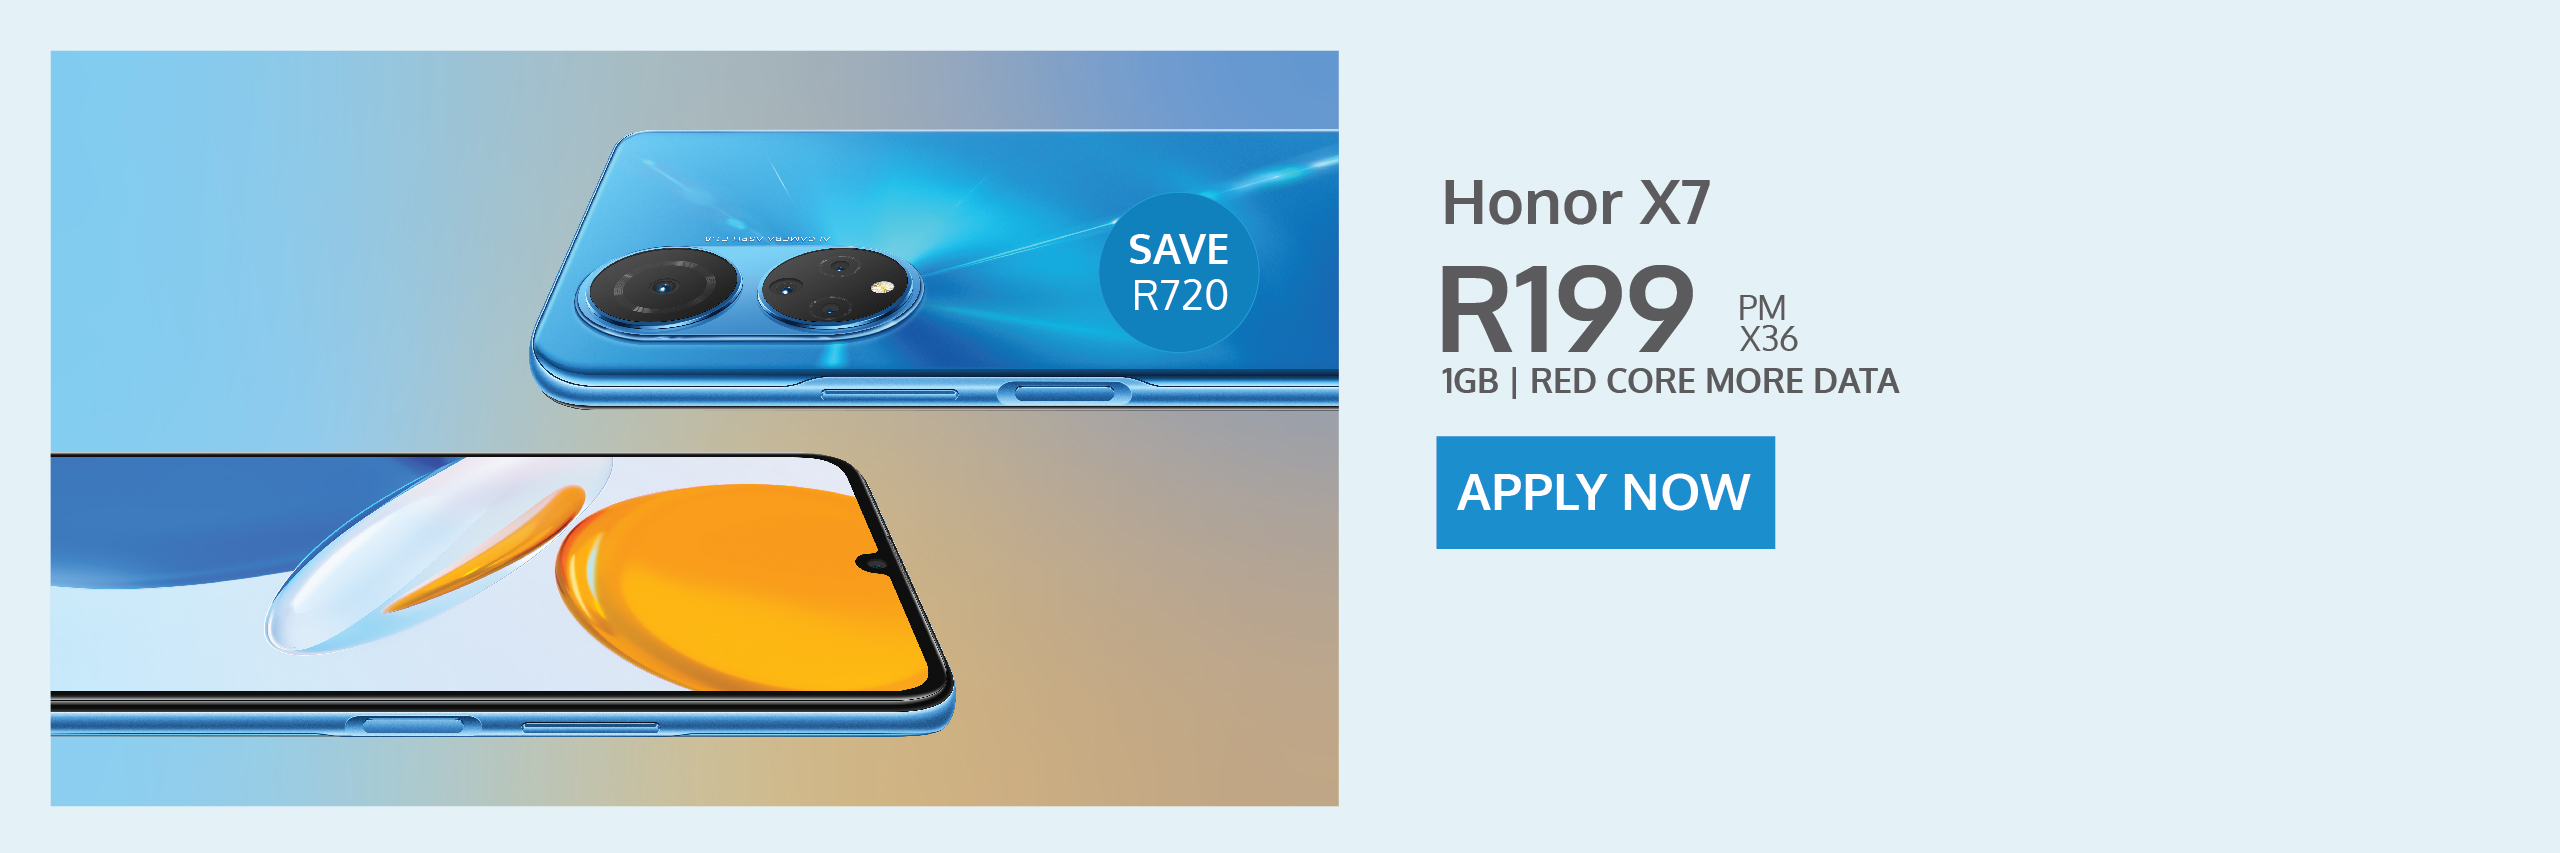 Honor X7 contract deal